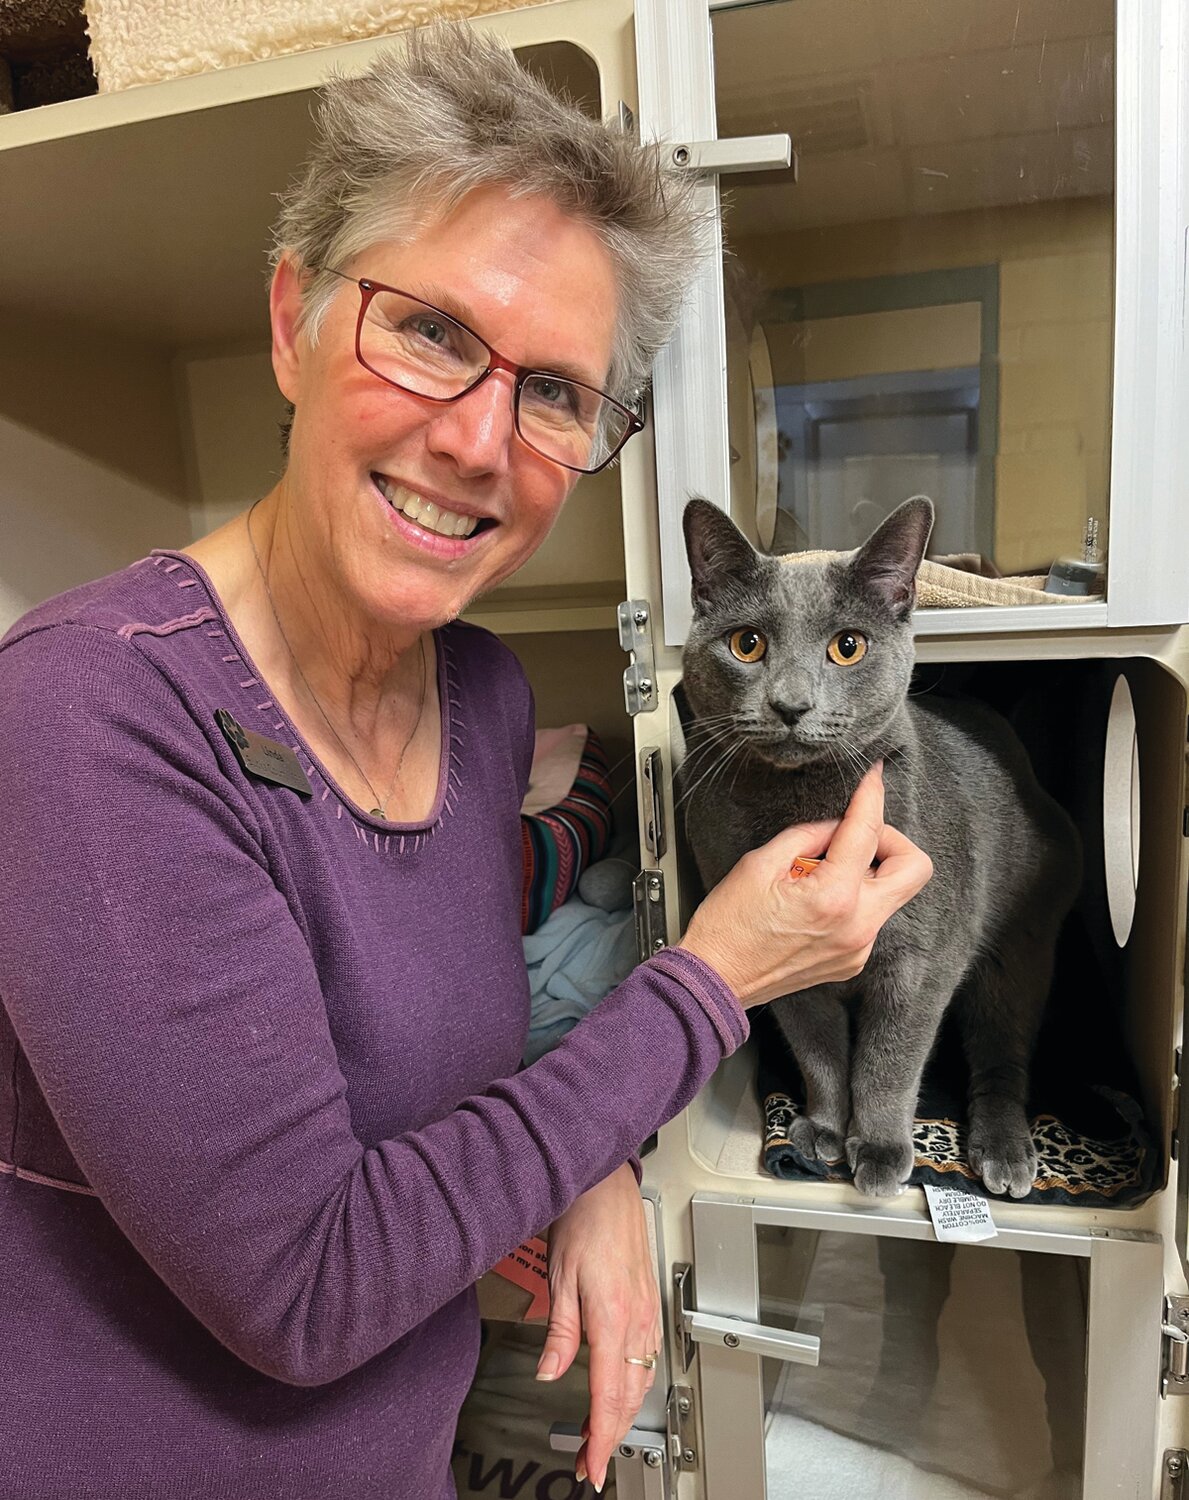 Linda Reider, executive director of the Bucks County Society for the Prevention of Cruelty to Animals, visits with Wesley, who is awaiting adoption at the shelter in Buckingham.